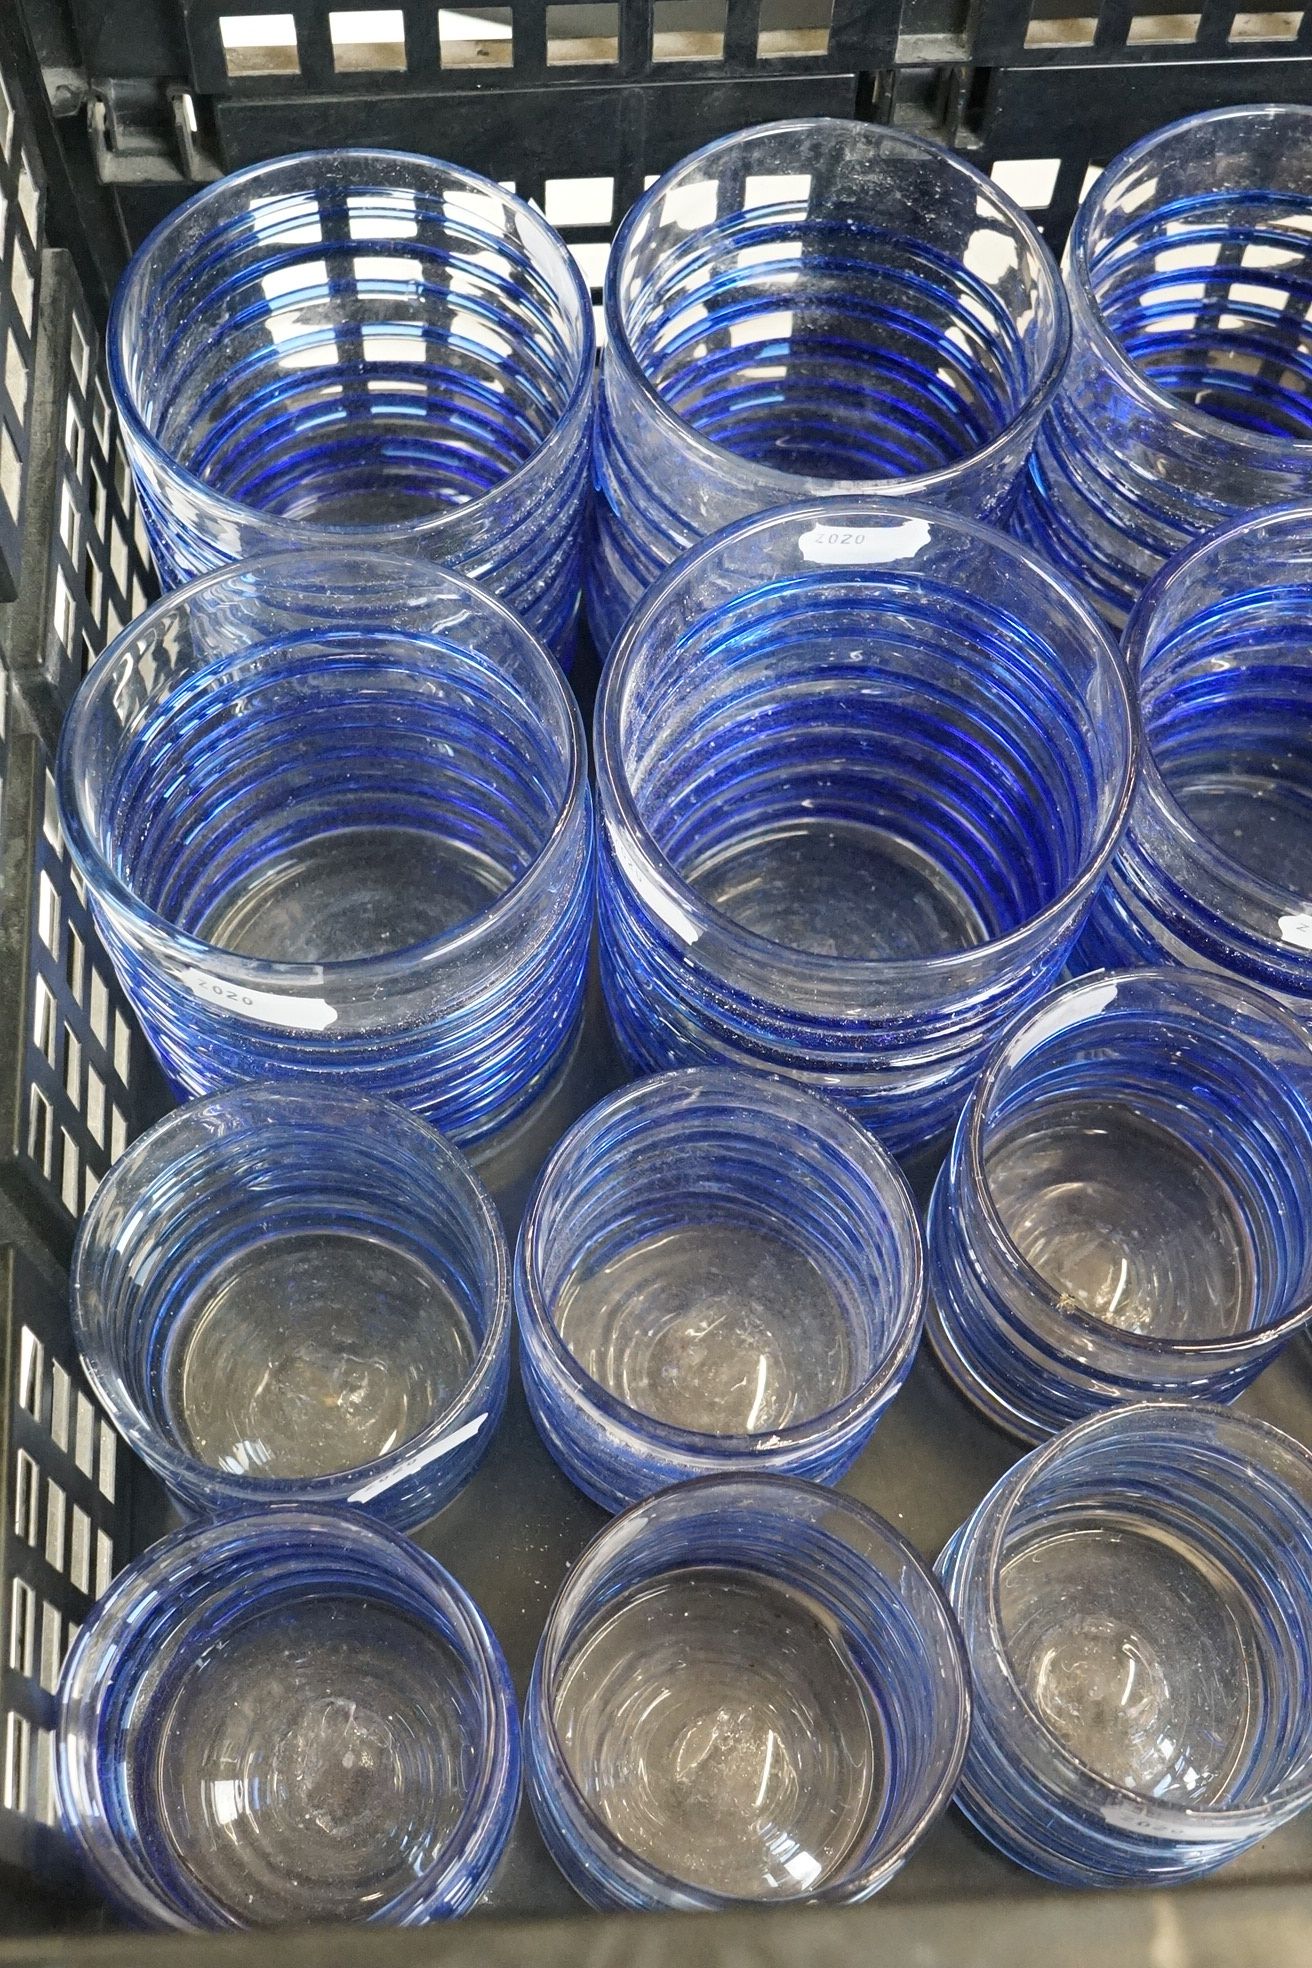 Set of 22 spiral-effect studio glass drinking glasses with relief blue spirals on a clear glass - Image 4 of 6